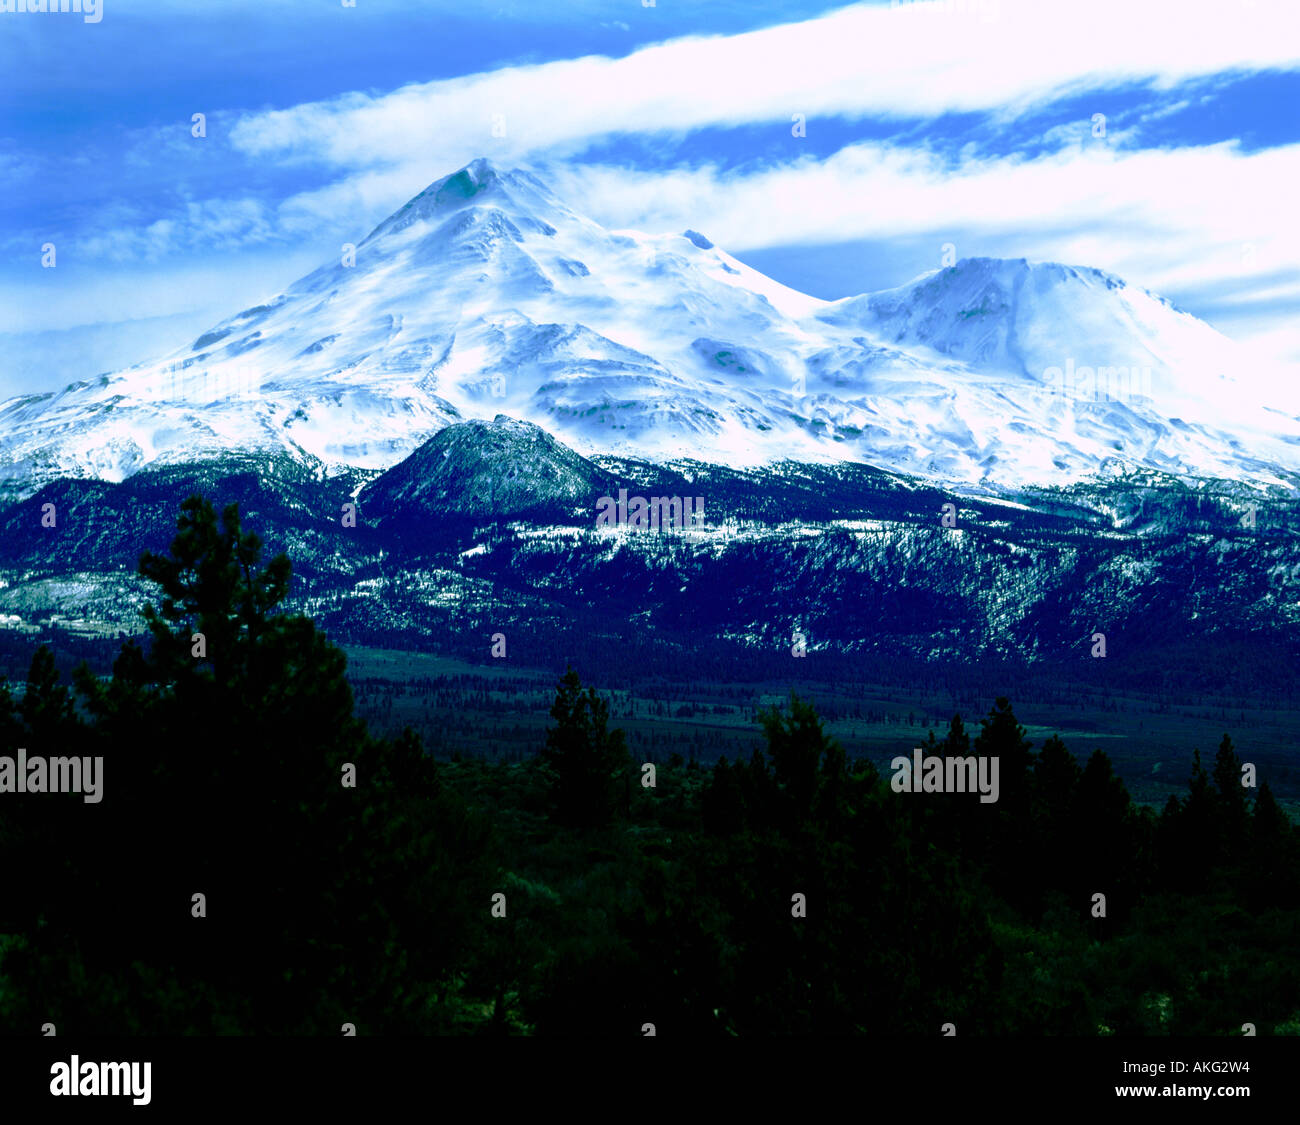 Mount Shasta rises over the lowlands of Northern California Stock Photo